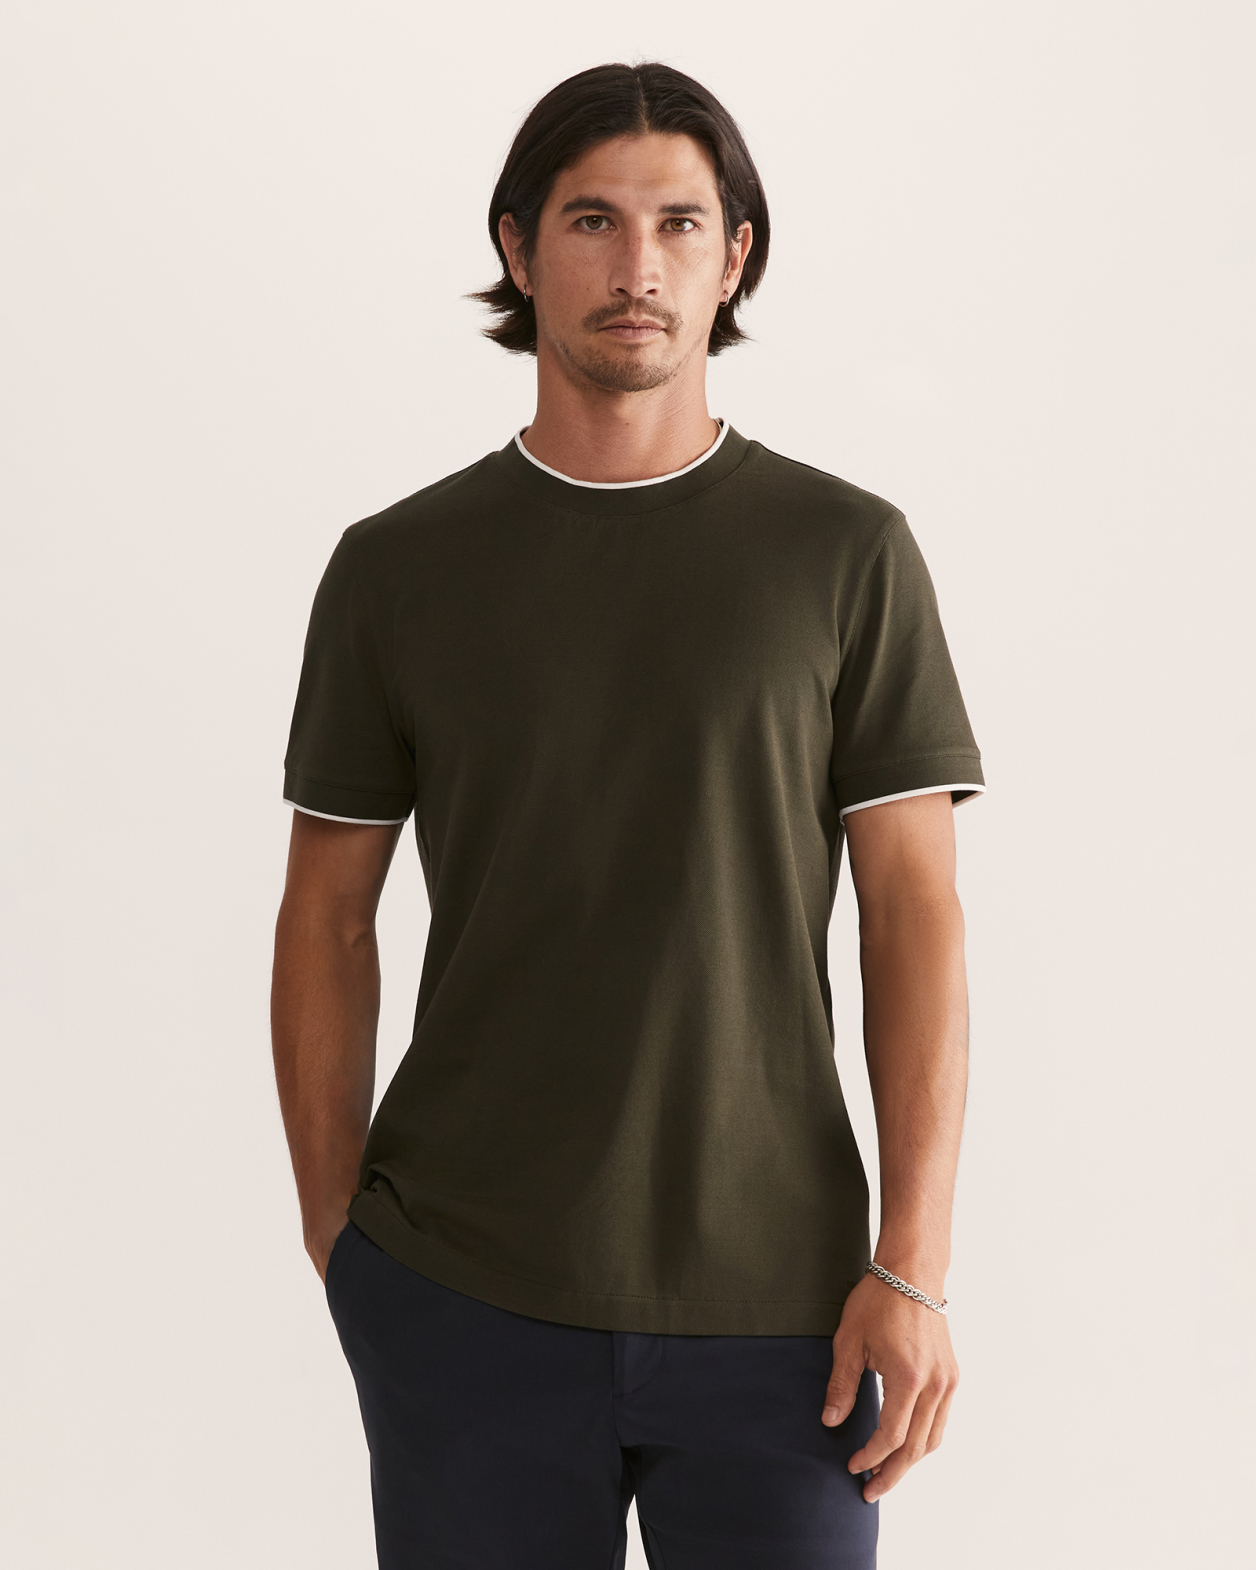 Andy Tipped Crew in KHAKI